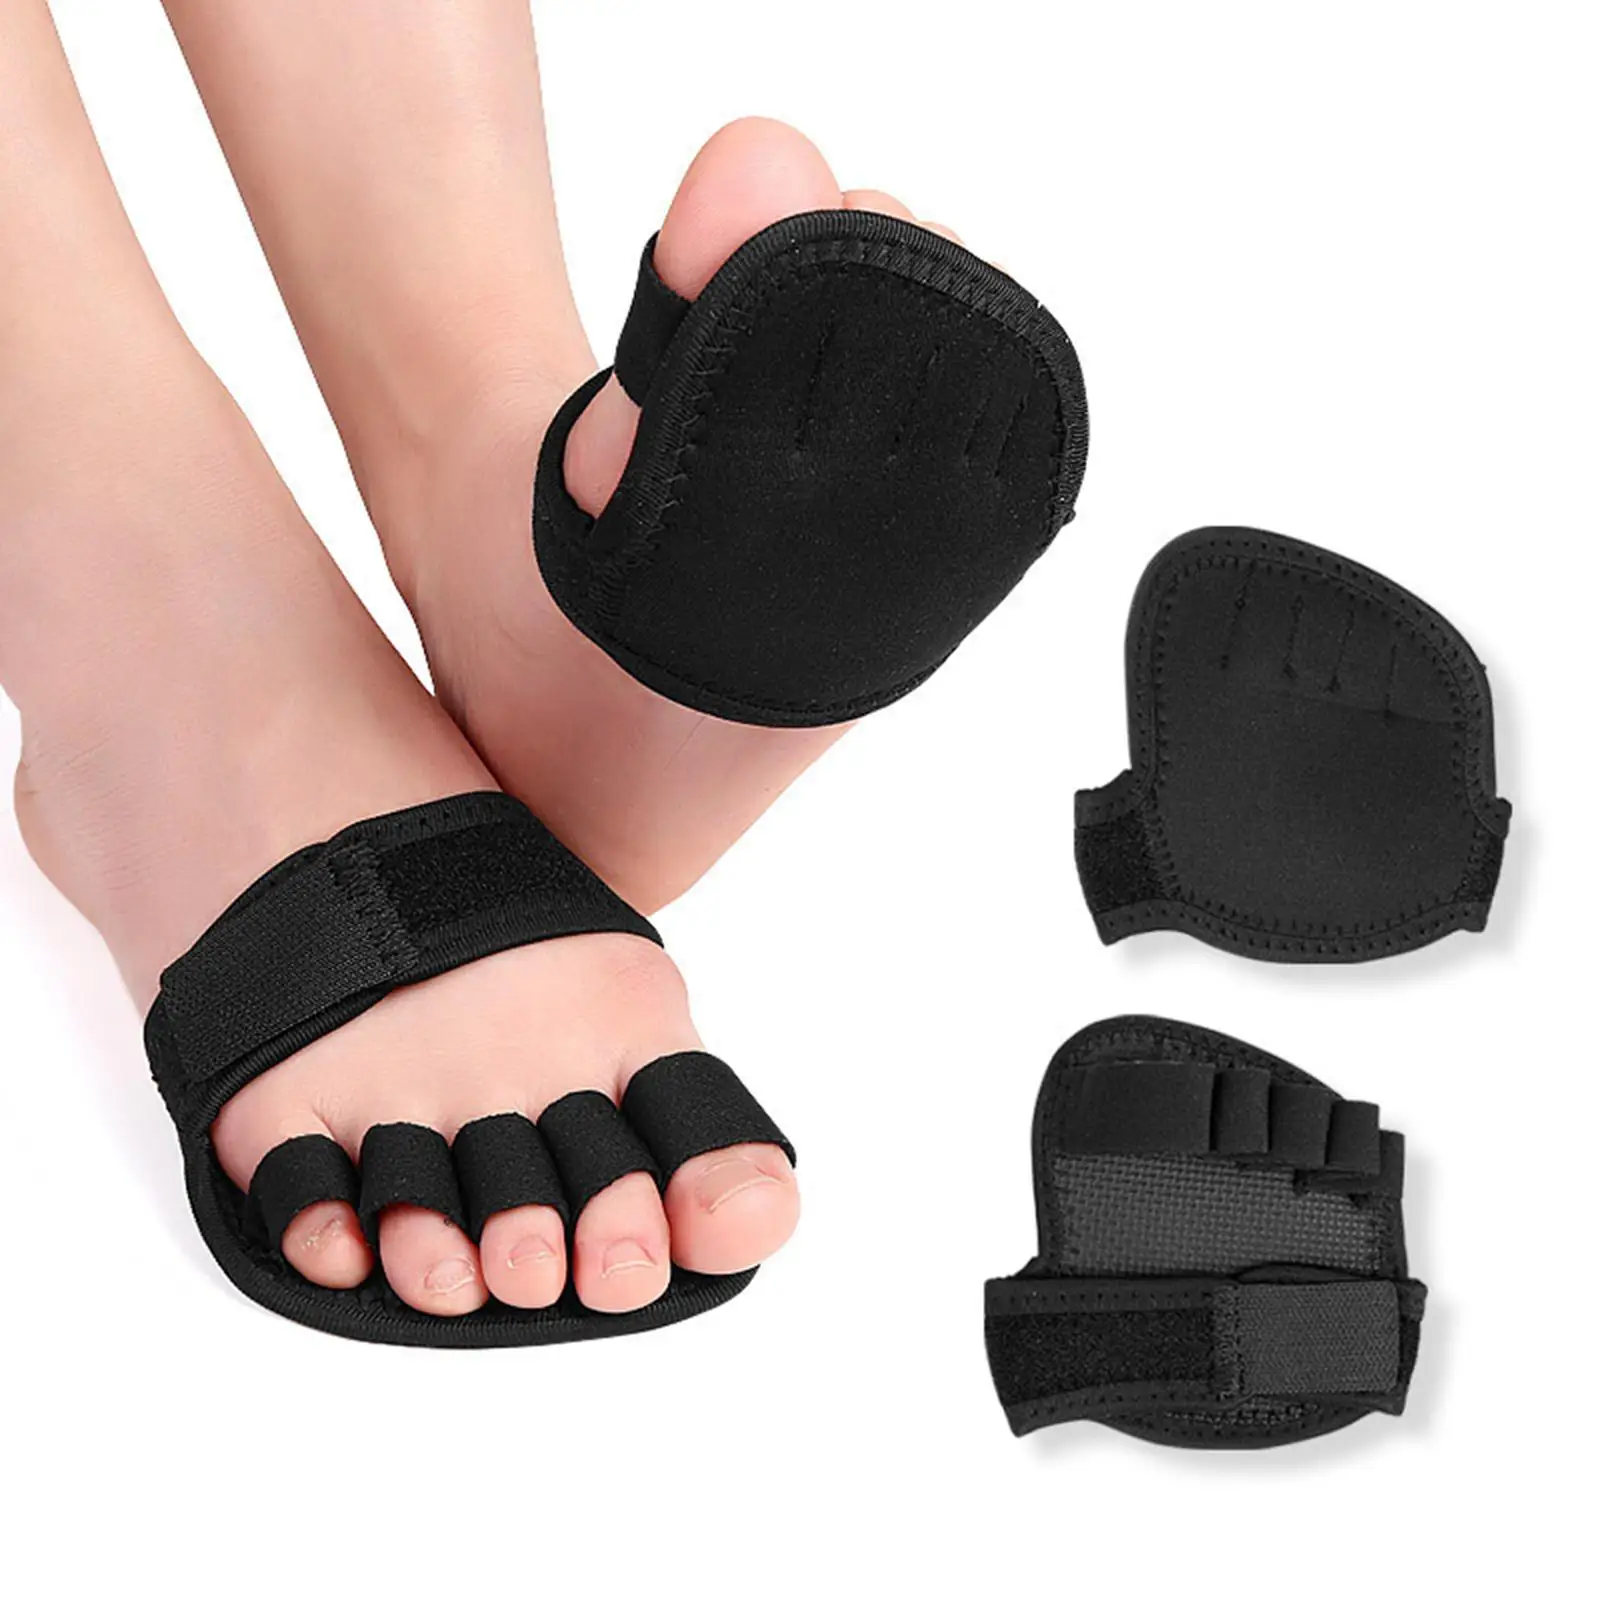 Toe Separator Sbr Forefoot Pads Orthotics Straightener for Big Toe Alignment Foot Relief Pain Overlapping Toes for Ballet Unisex